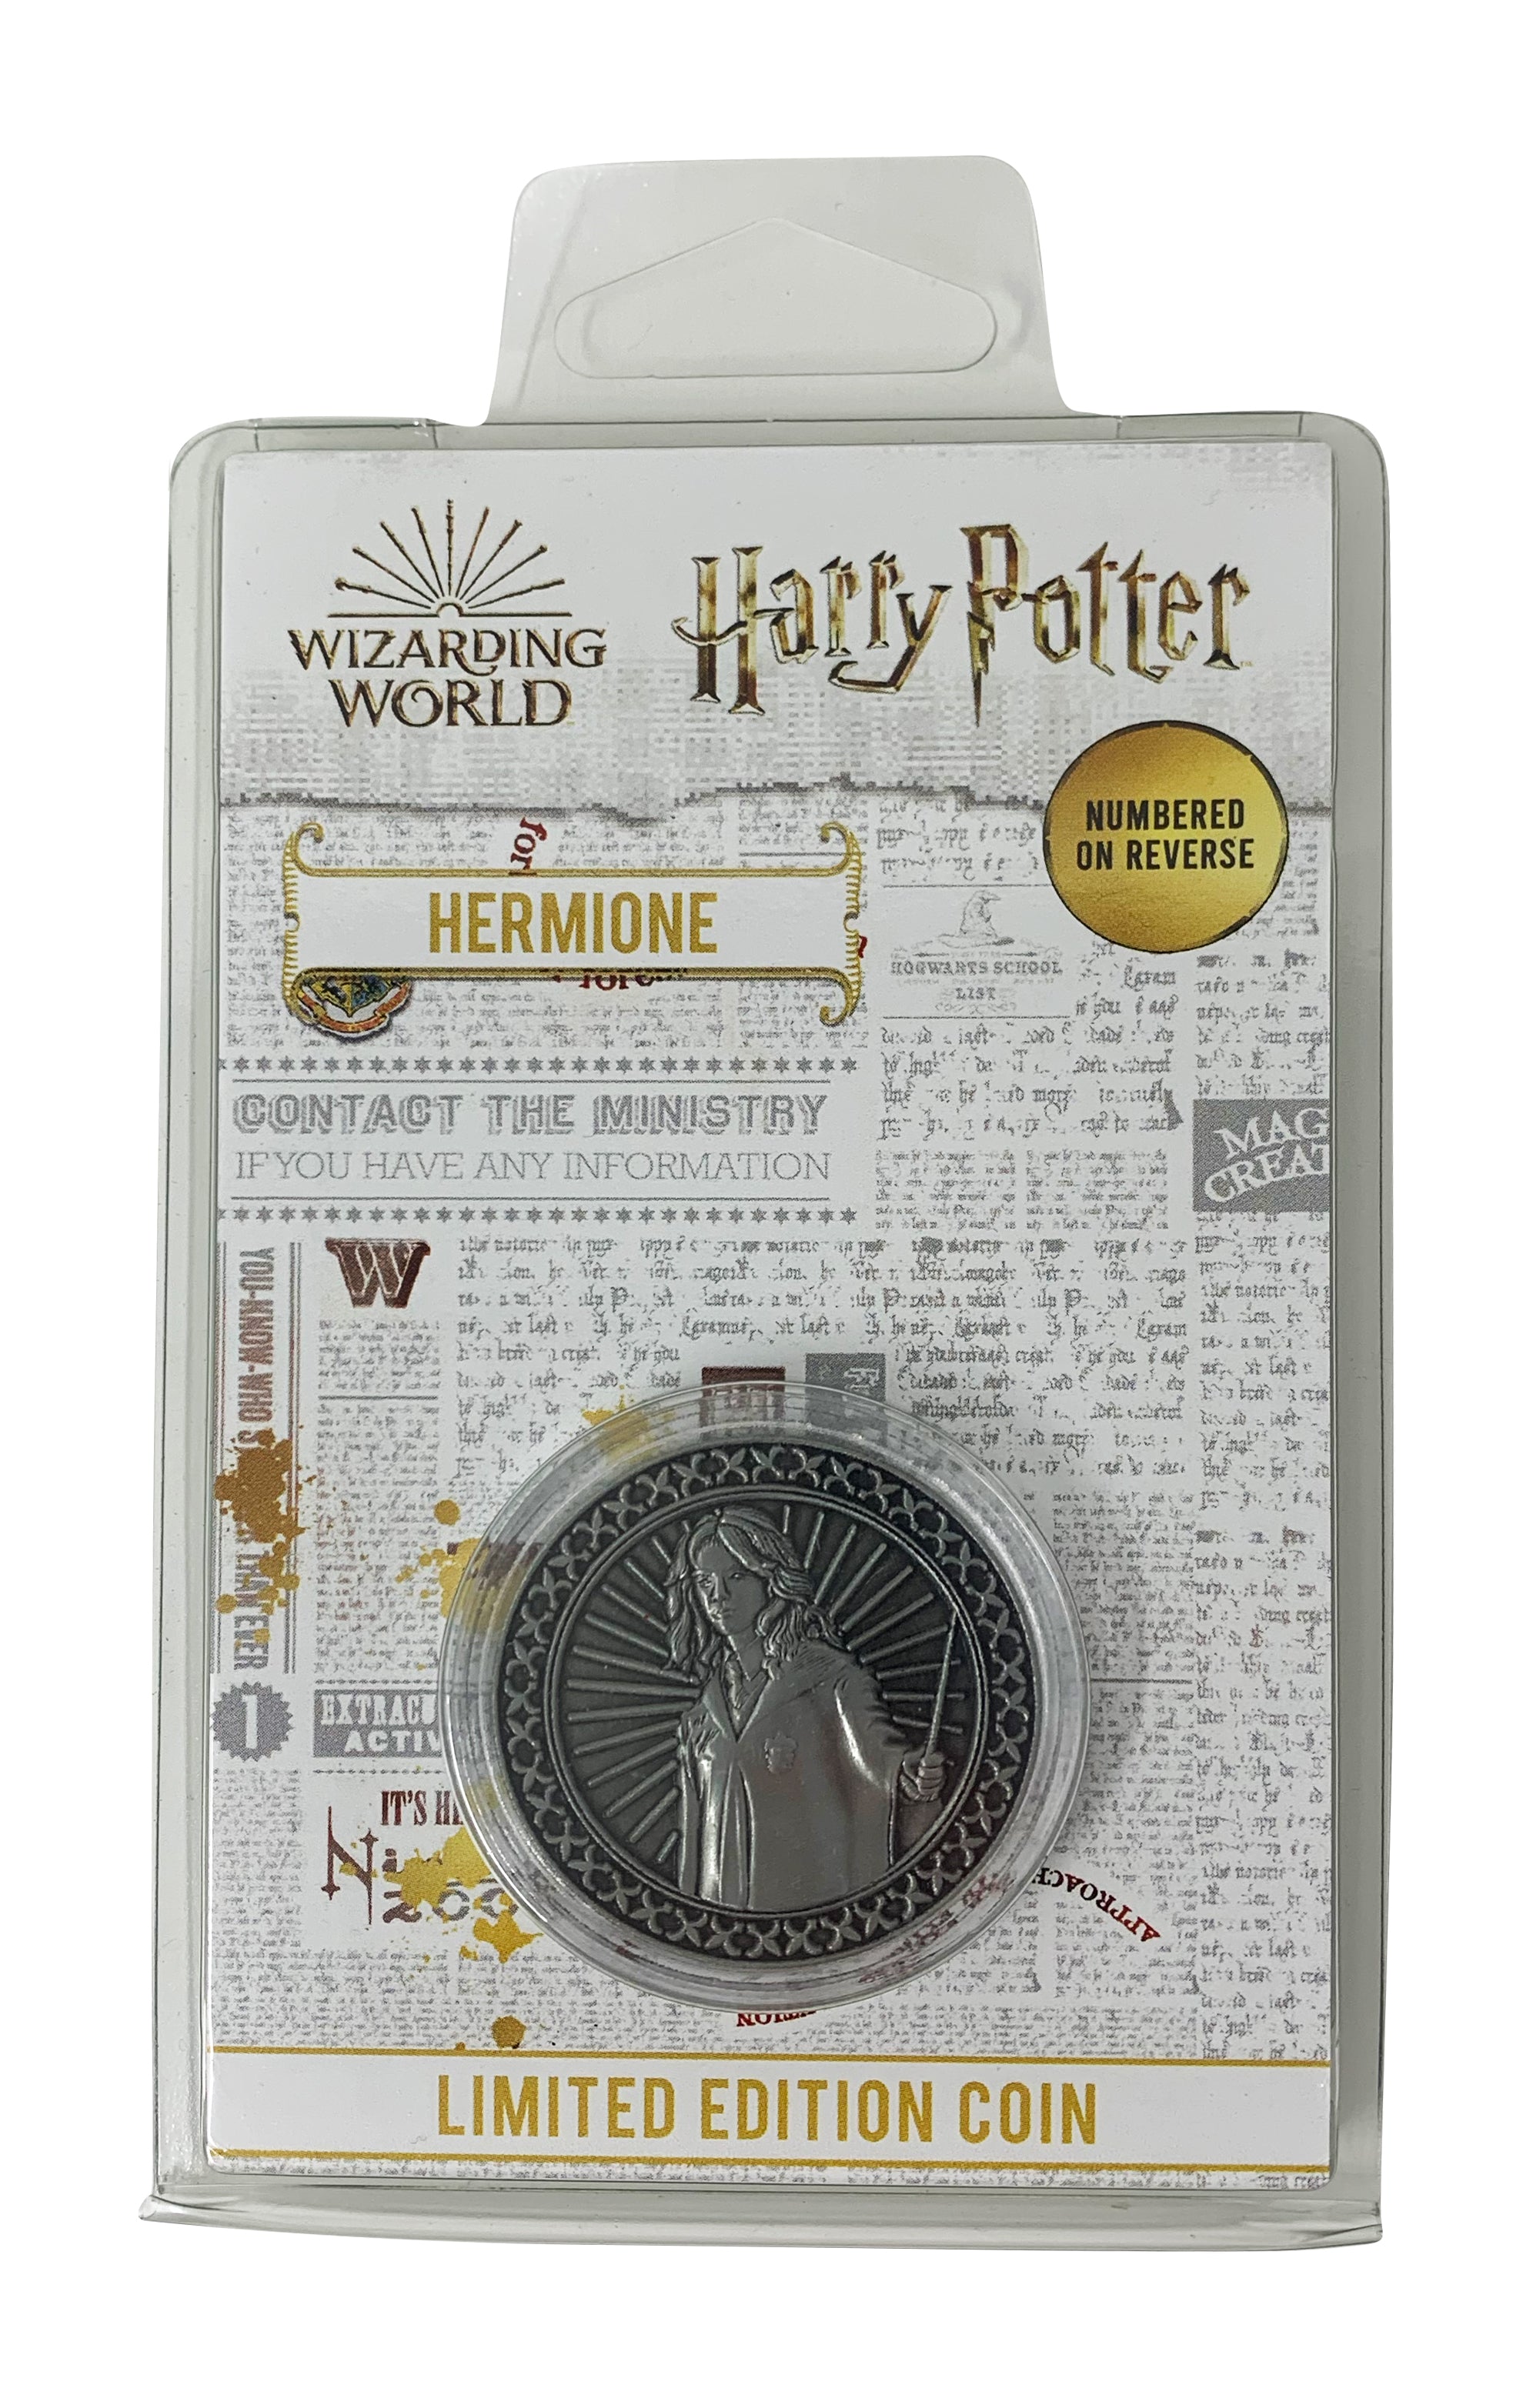 Harry Potter Limited Edition Coin - Hermione